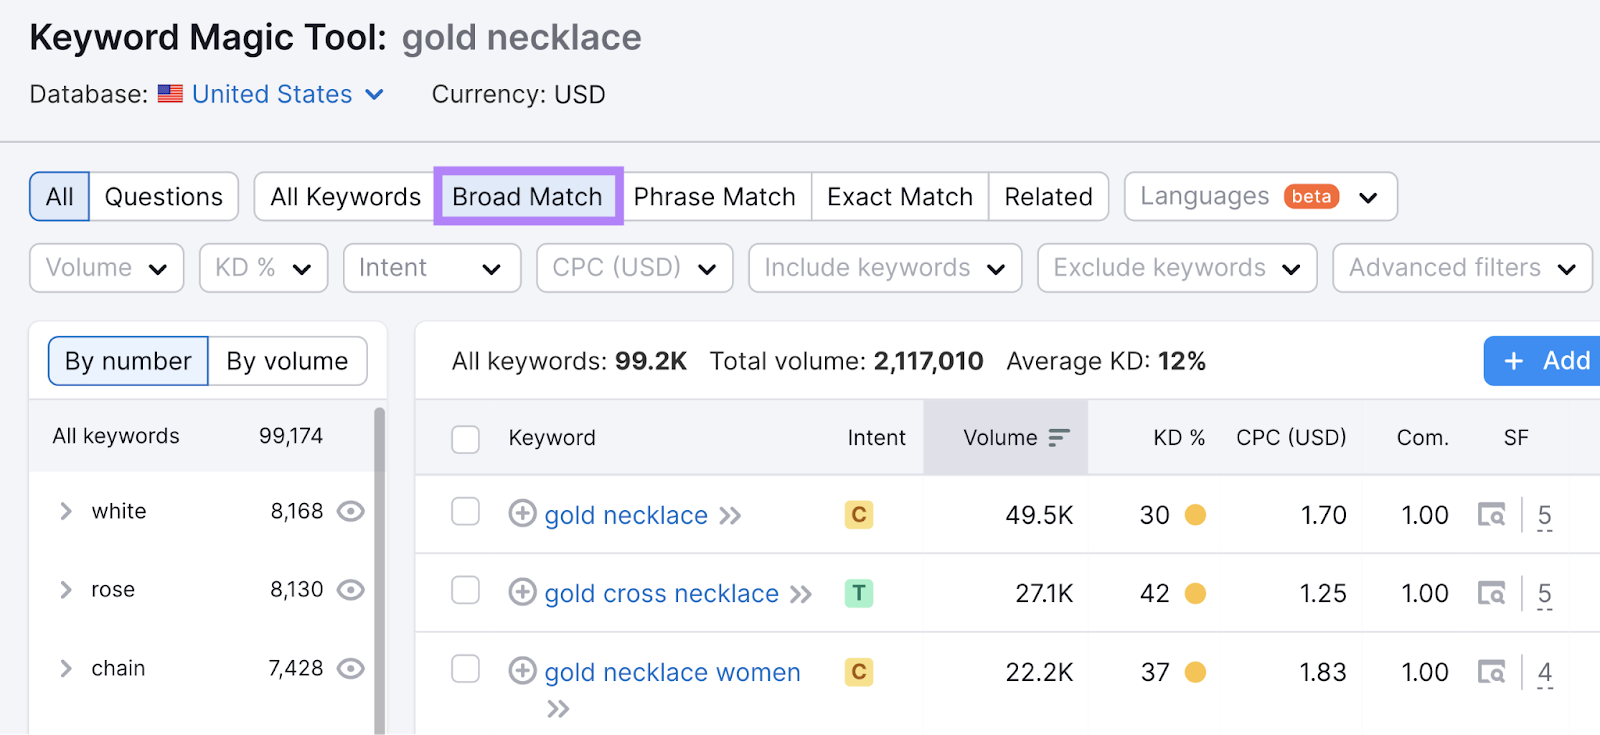 The "Broad Match" button near the top of the Keyword Magic Tool results page